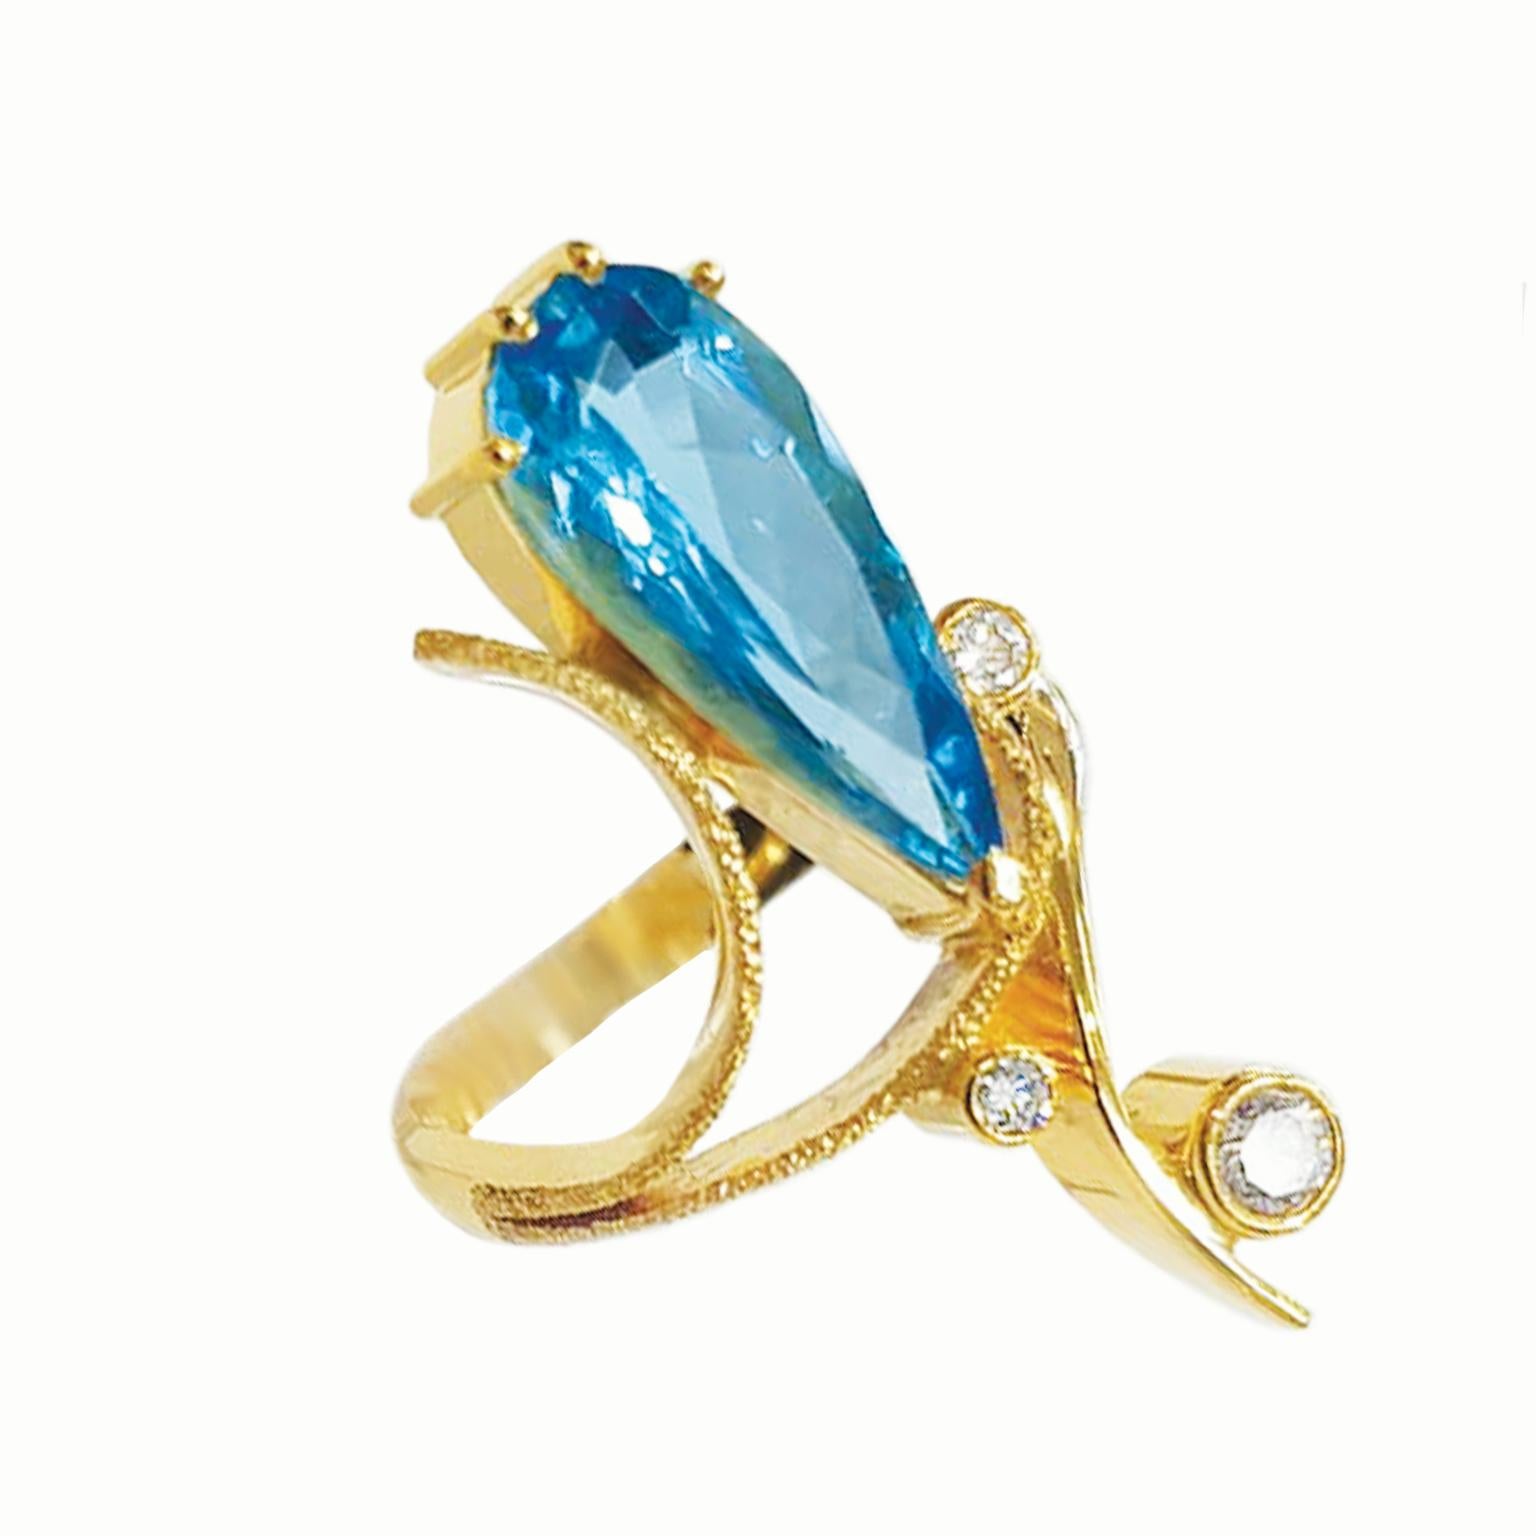 Unveiling a masterpiece by Paul Amey: a luxurious 9ct yellow gold ring adorned with a captivating Swiss blue pear-shaped topaz and diamonds. This handcrafted creation is a true embodiment of elegance and sophistication.

The focal point is a